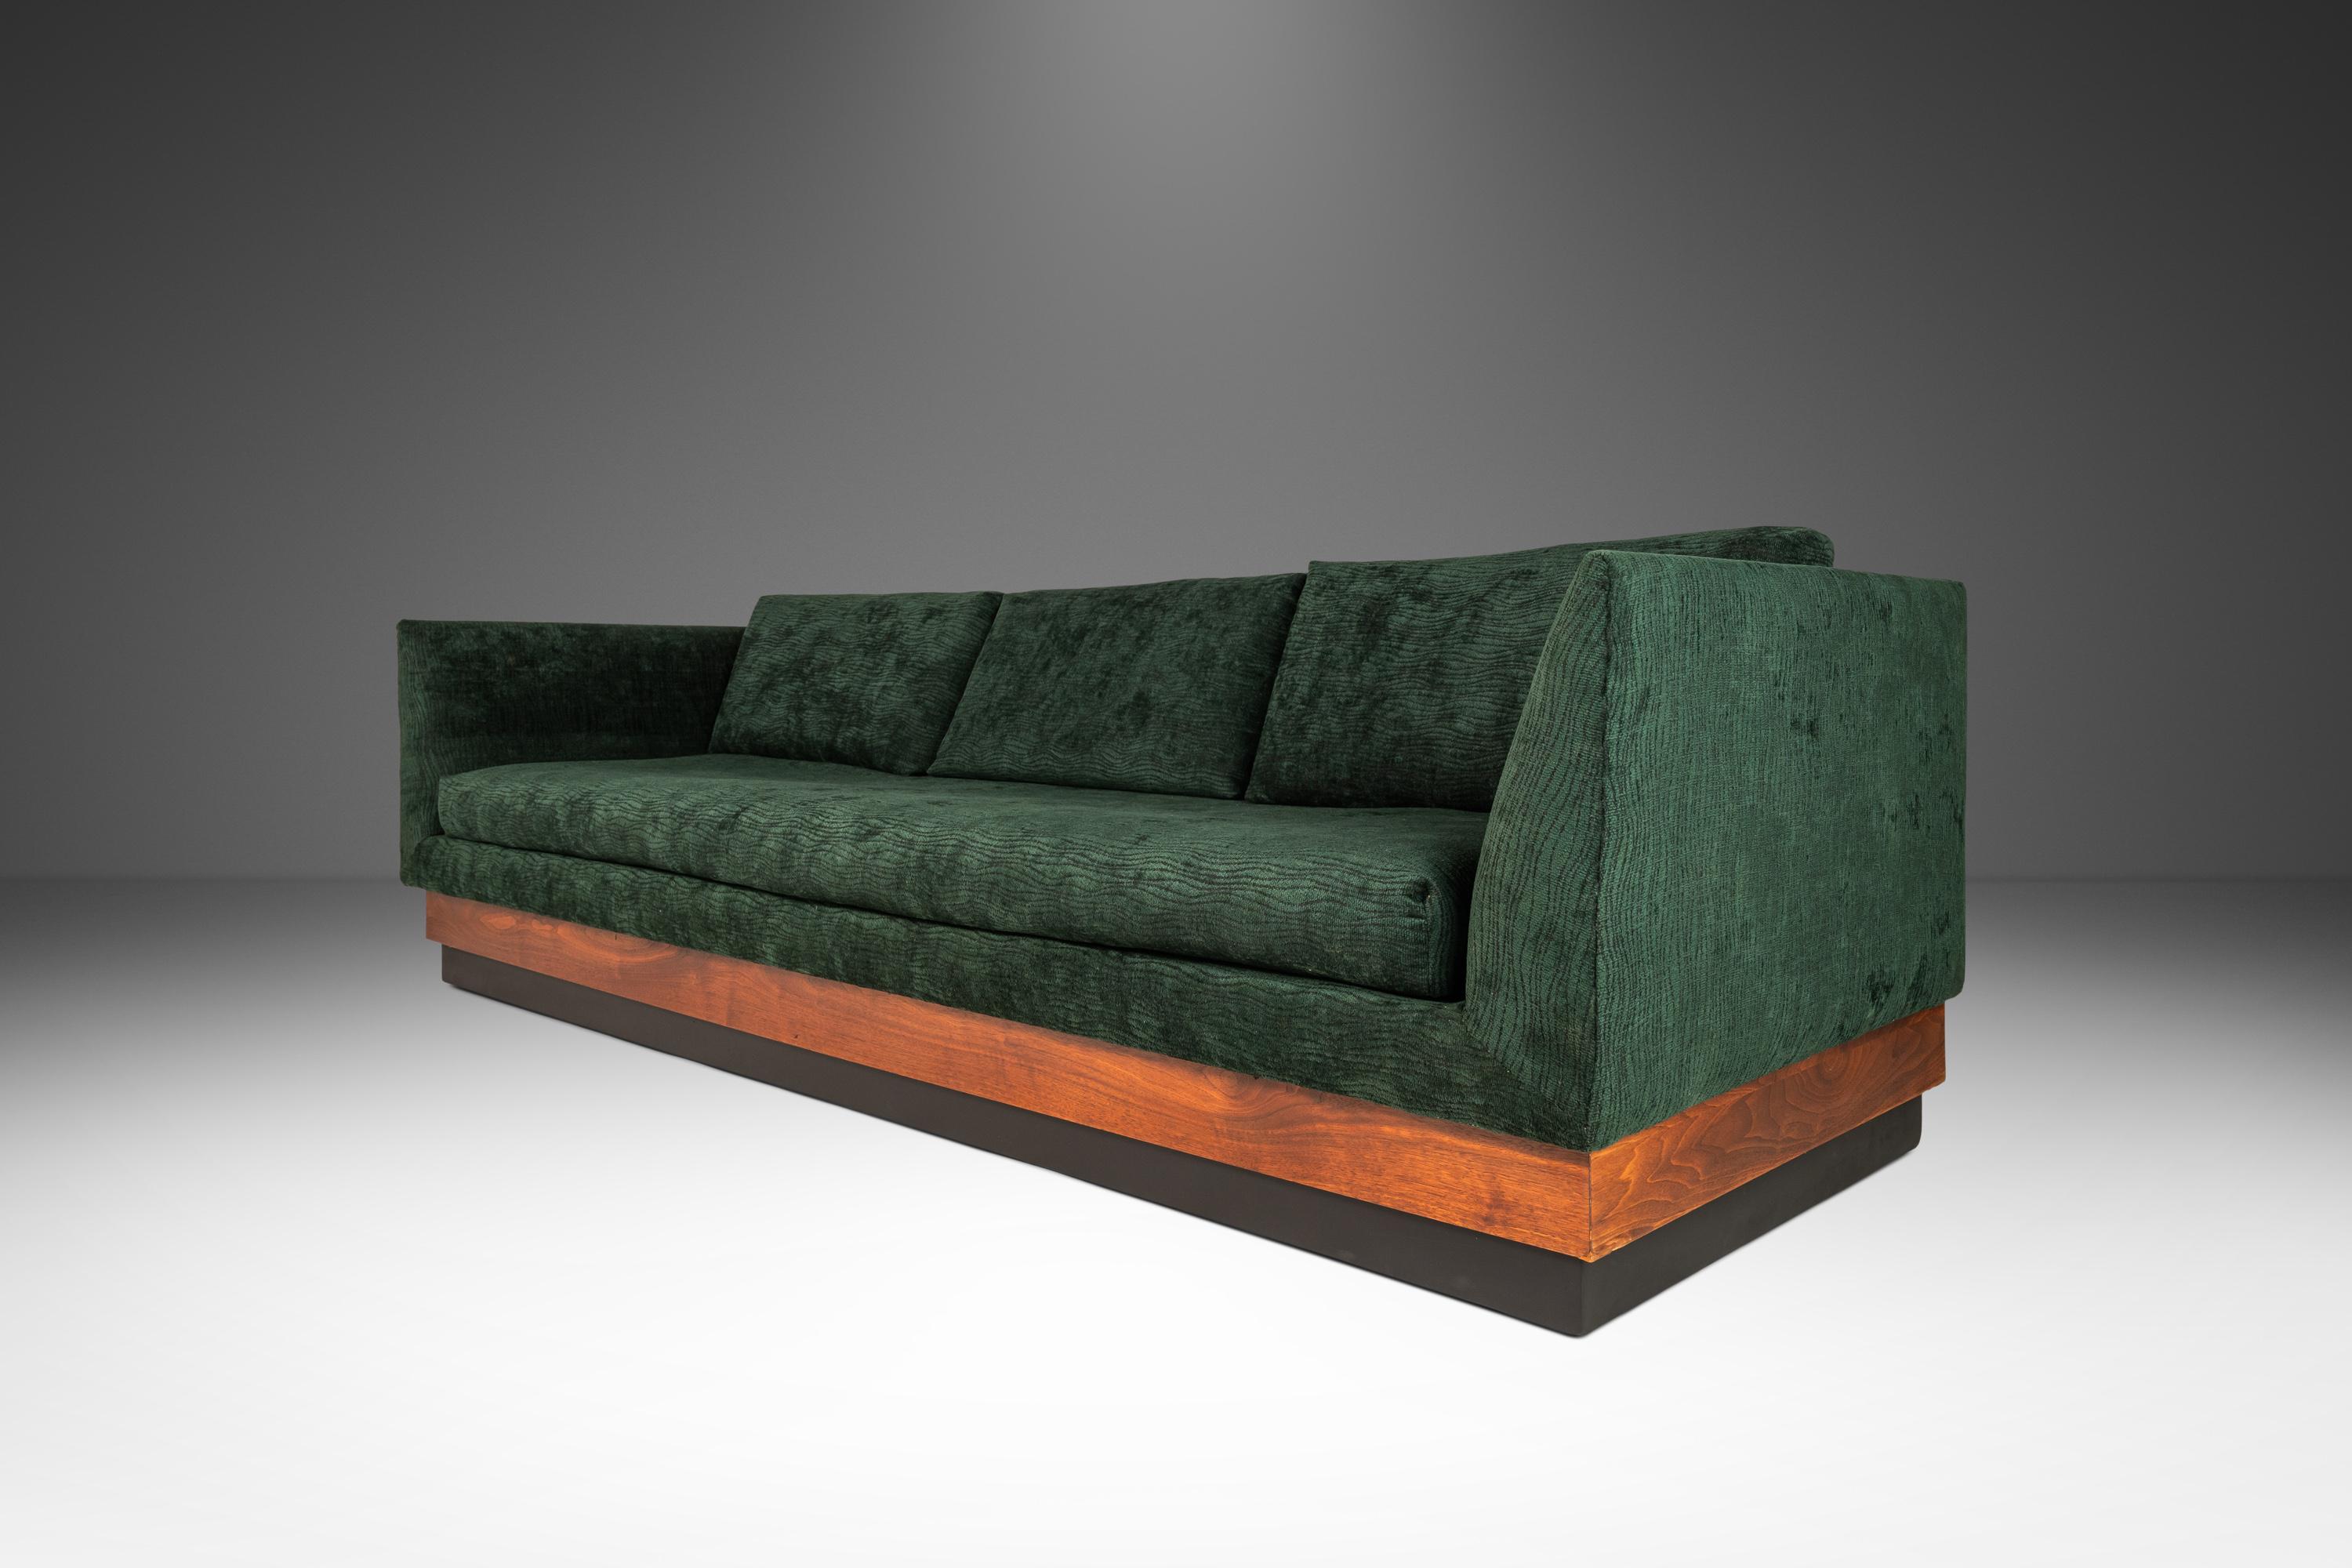 Mid-20th Century MCM Platform Sofa in Walnut by Adrian Pearsall for Craft Associates, c. 1960's For Sale